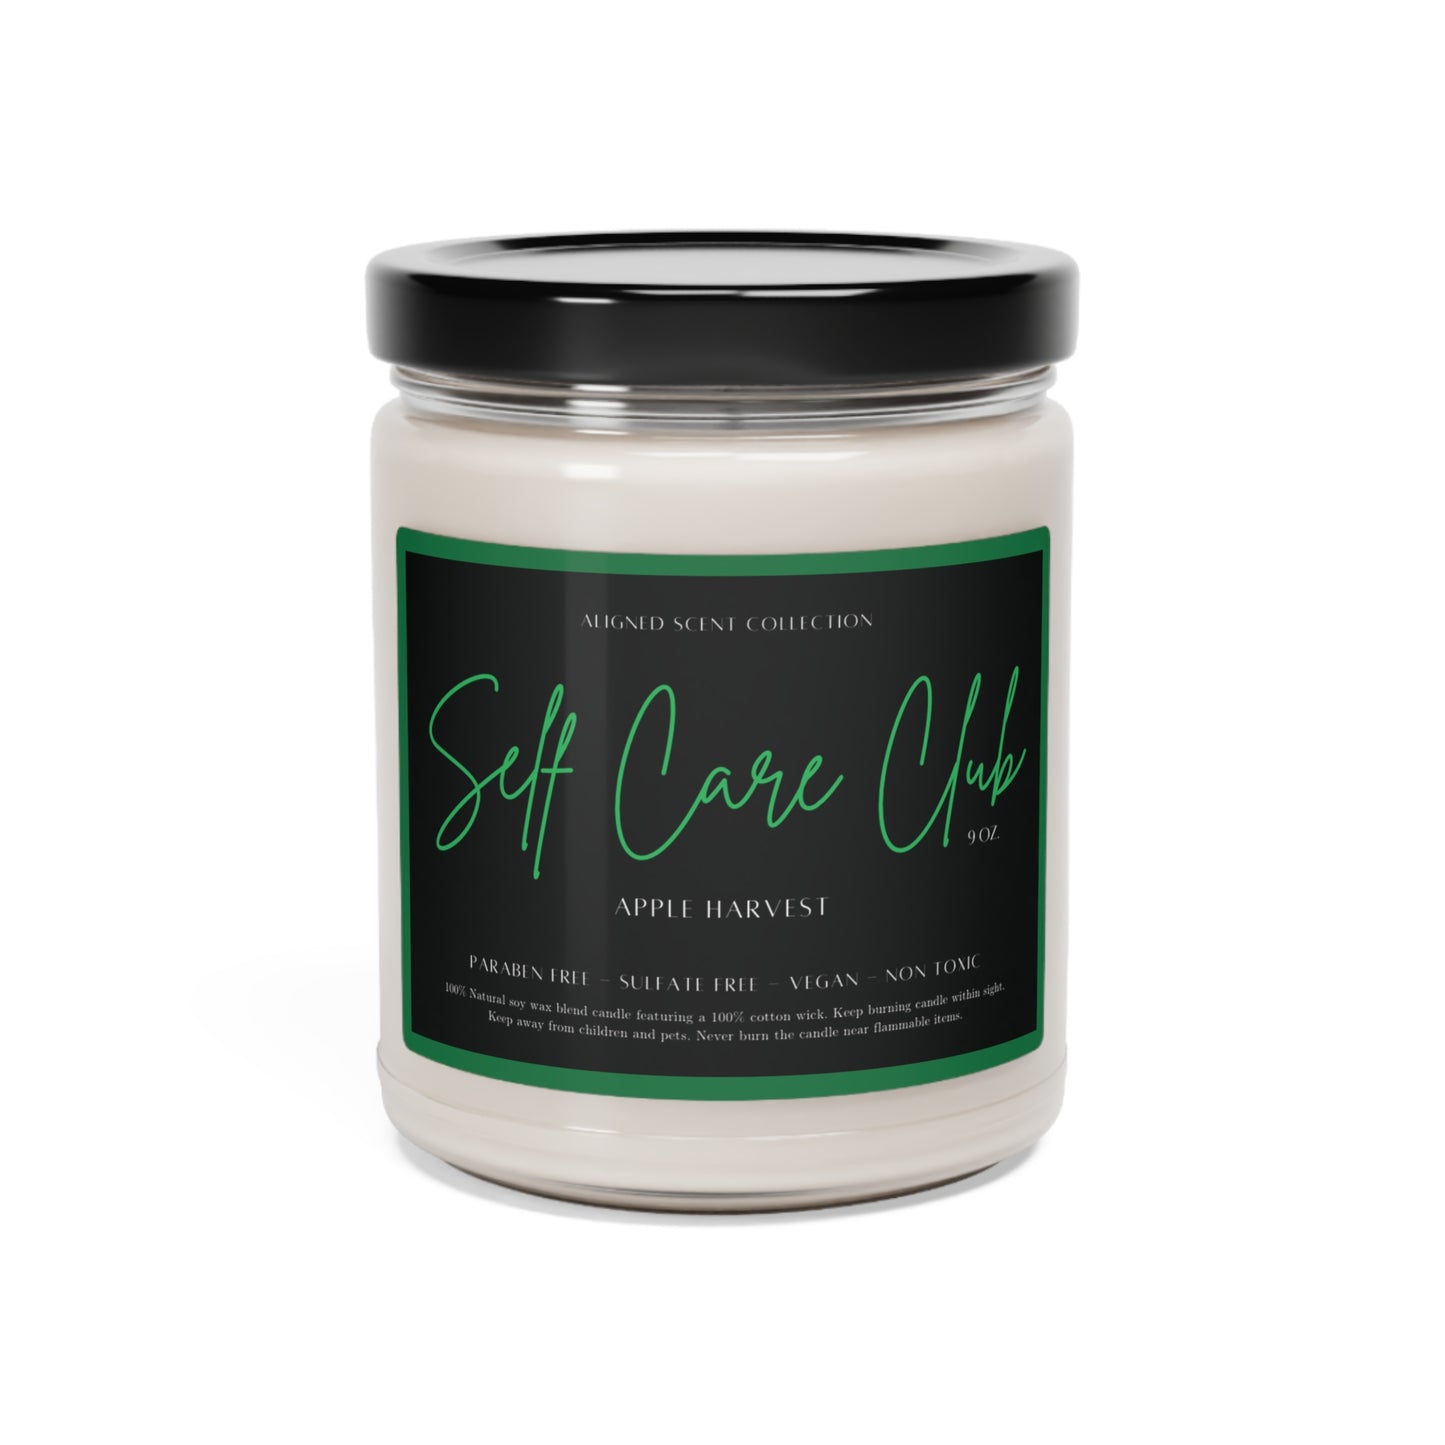 Self Care Club Soy Candle, 9oz